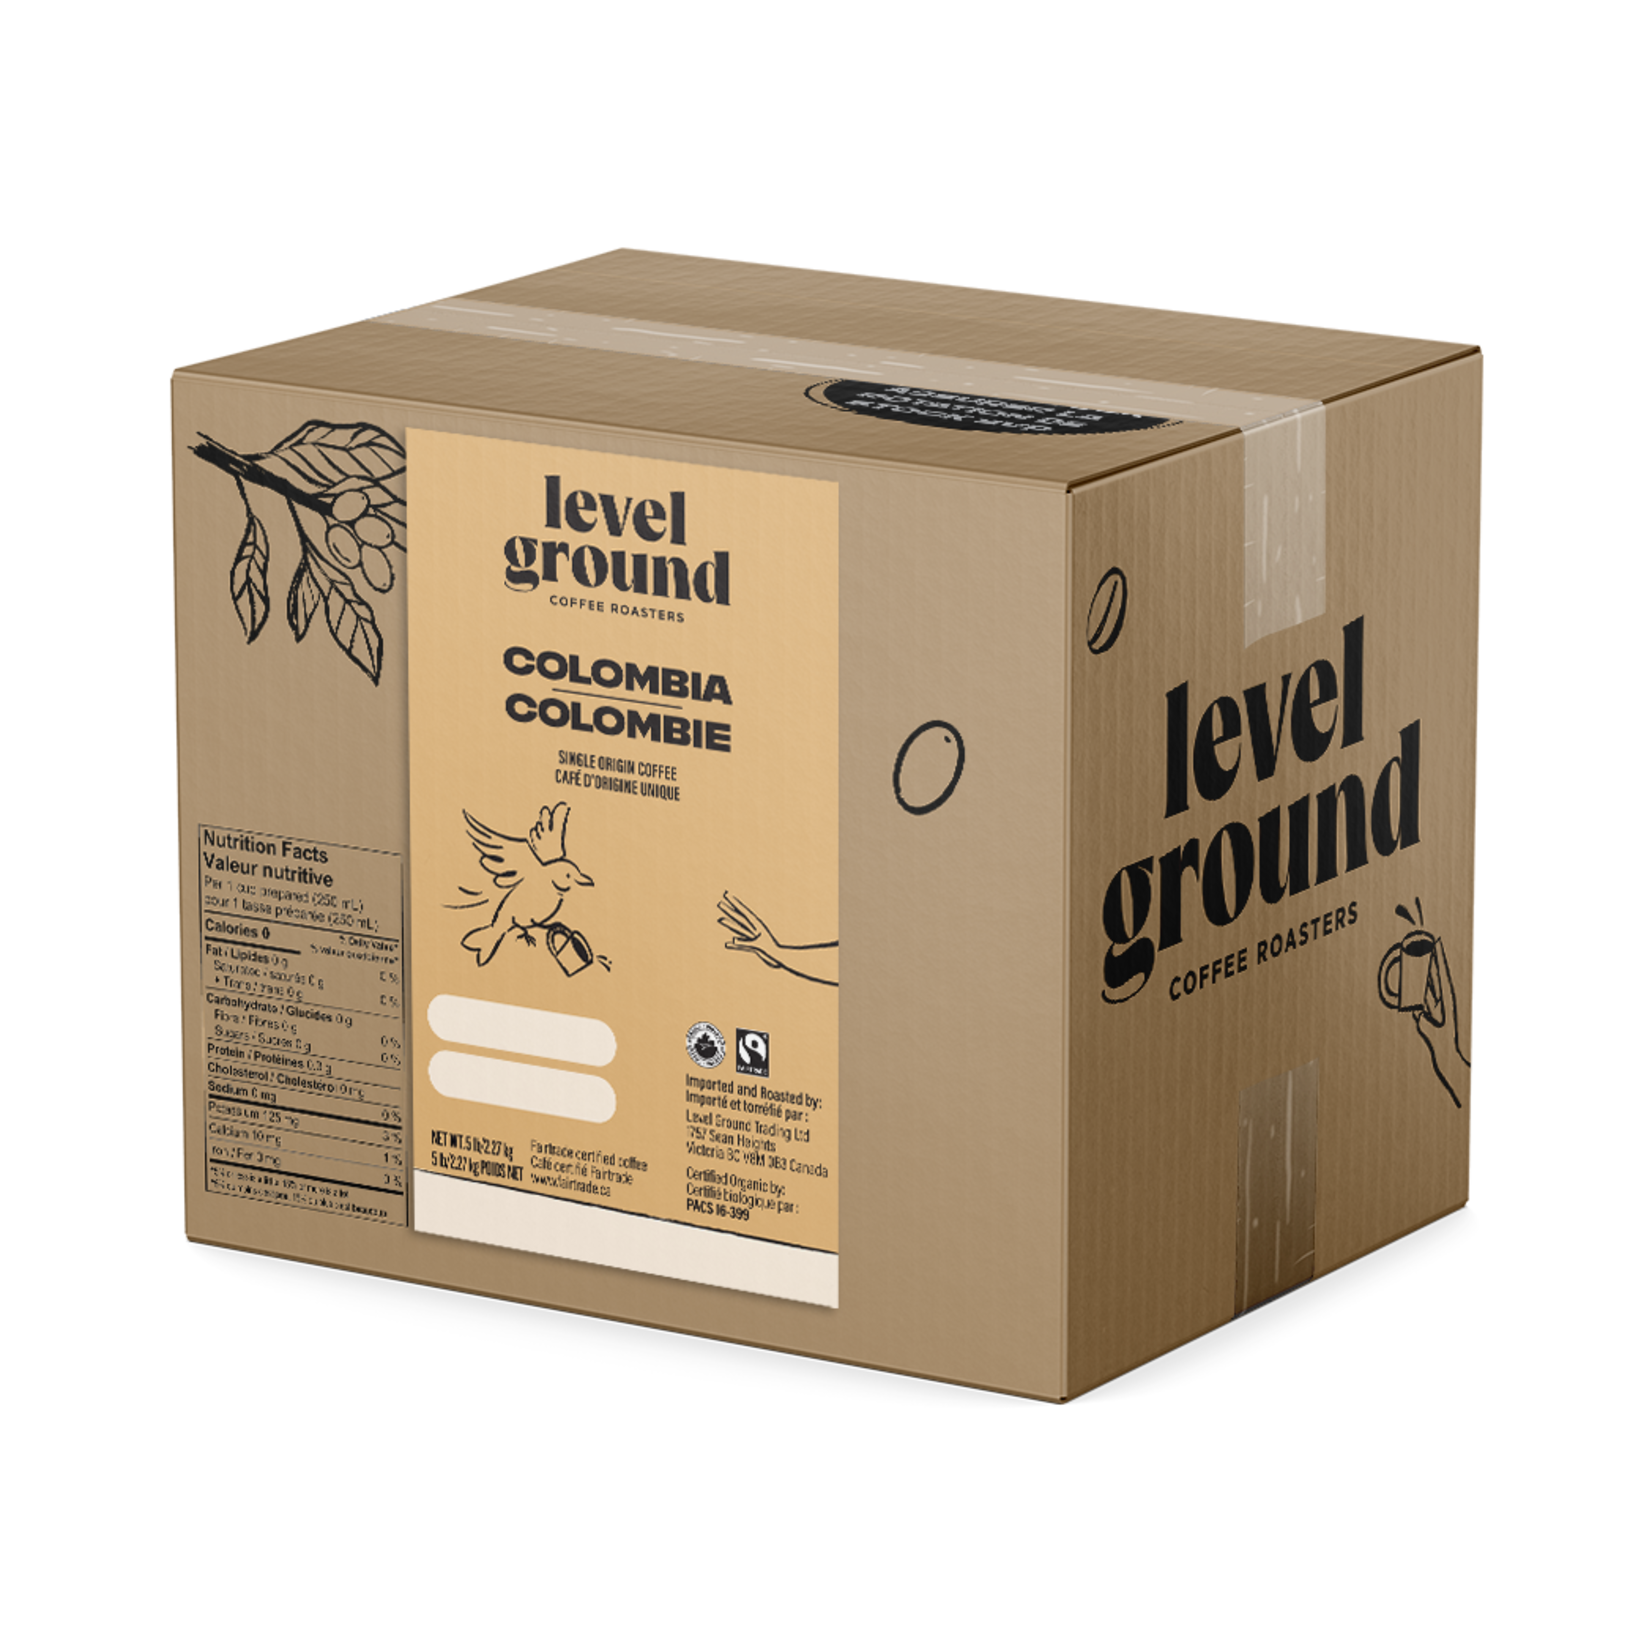 Level Ground Coffee - Level Ground Colombia Bean - 5lb Box